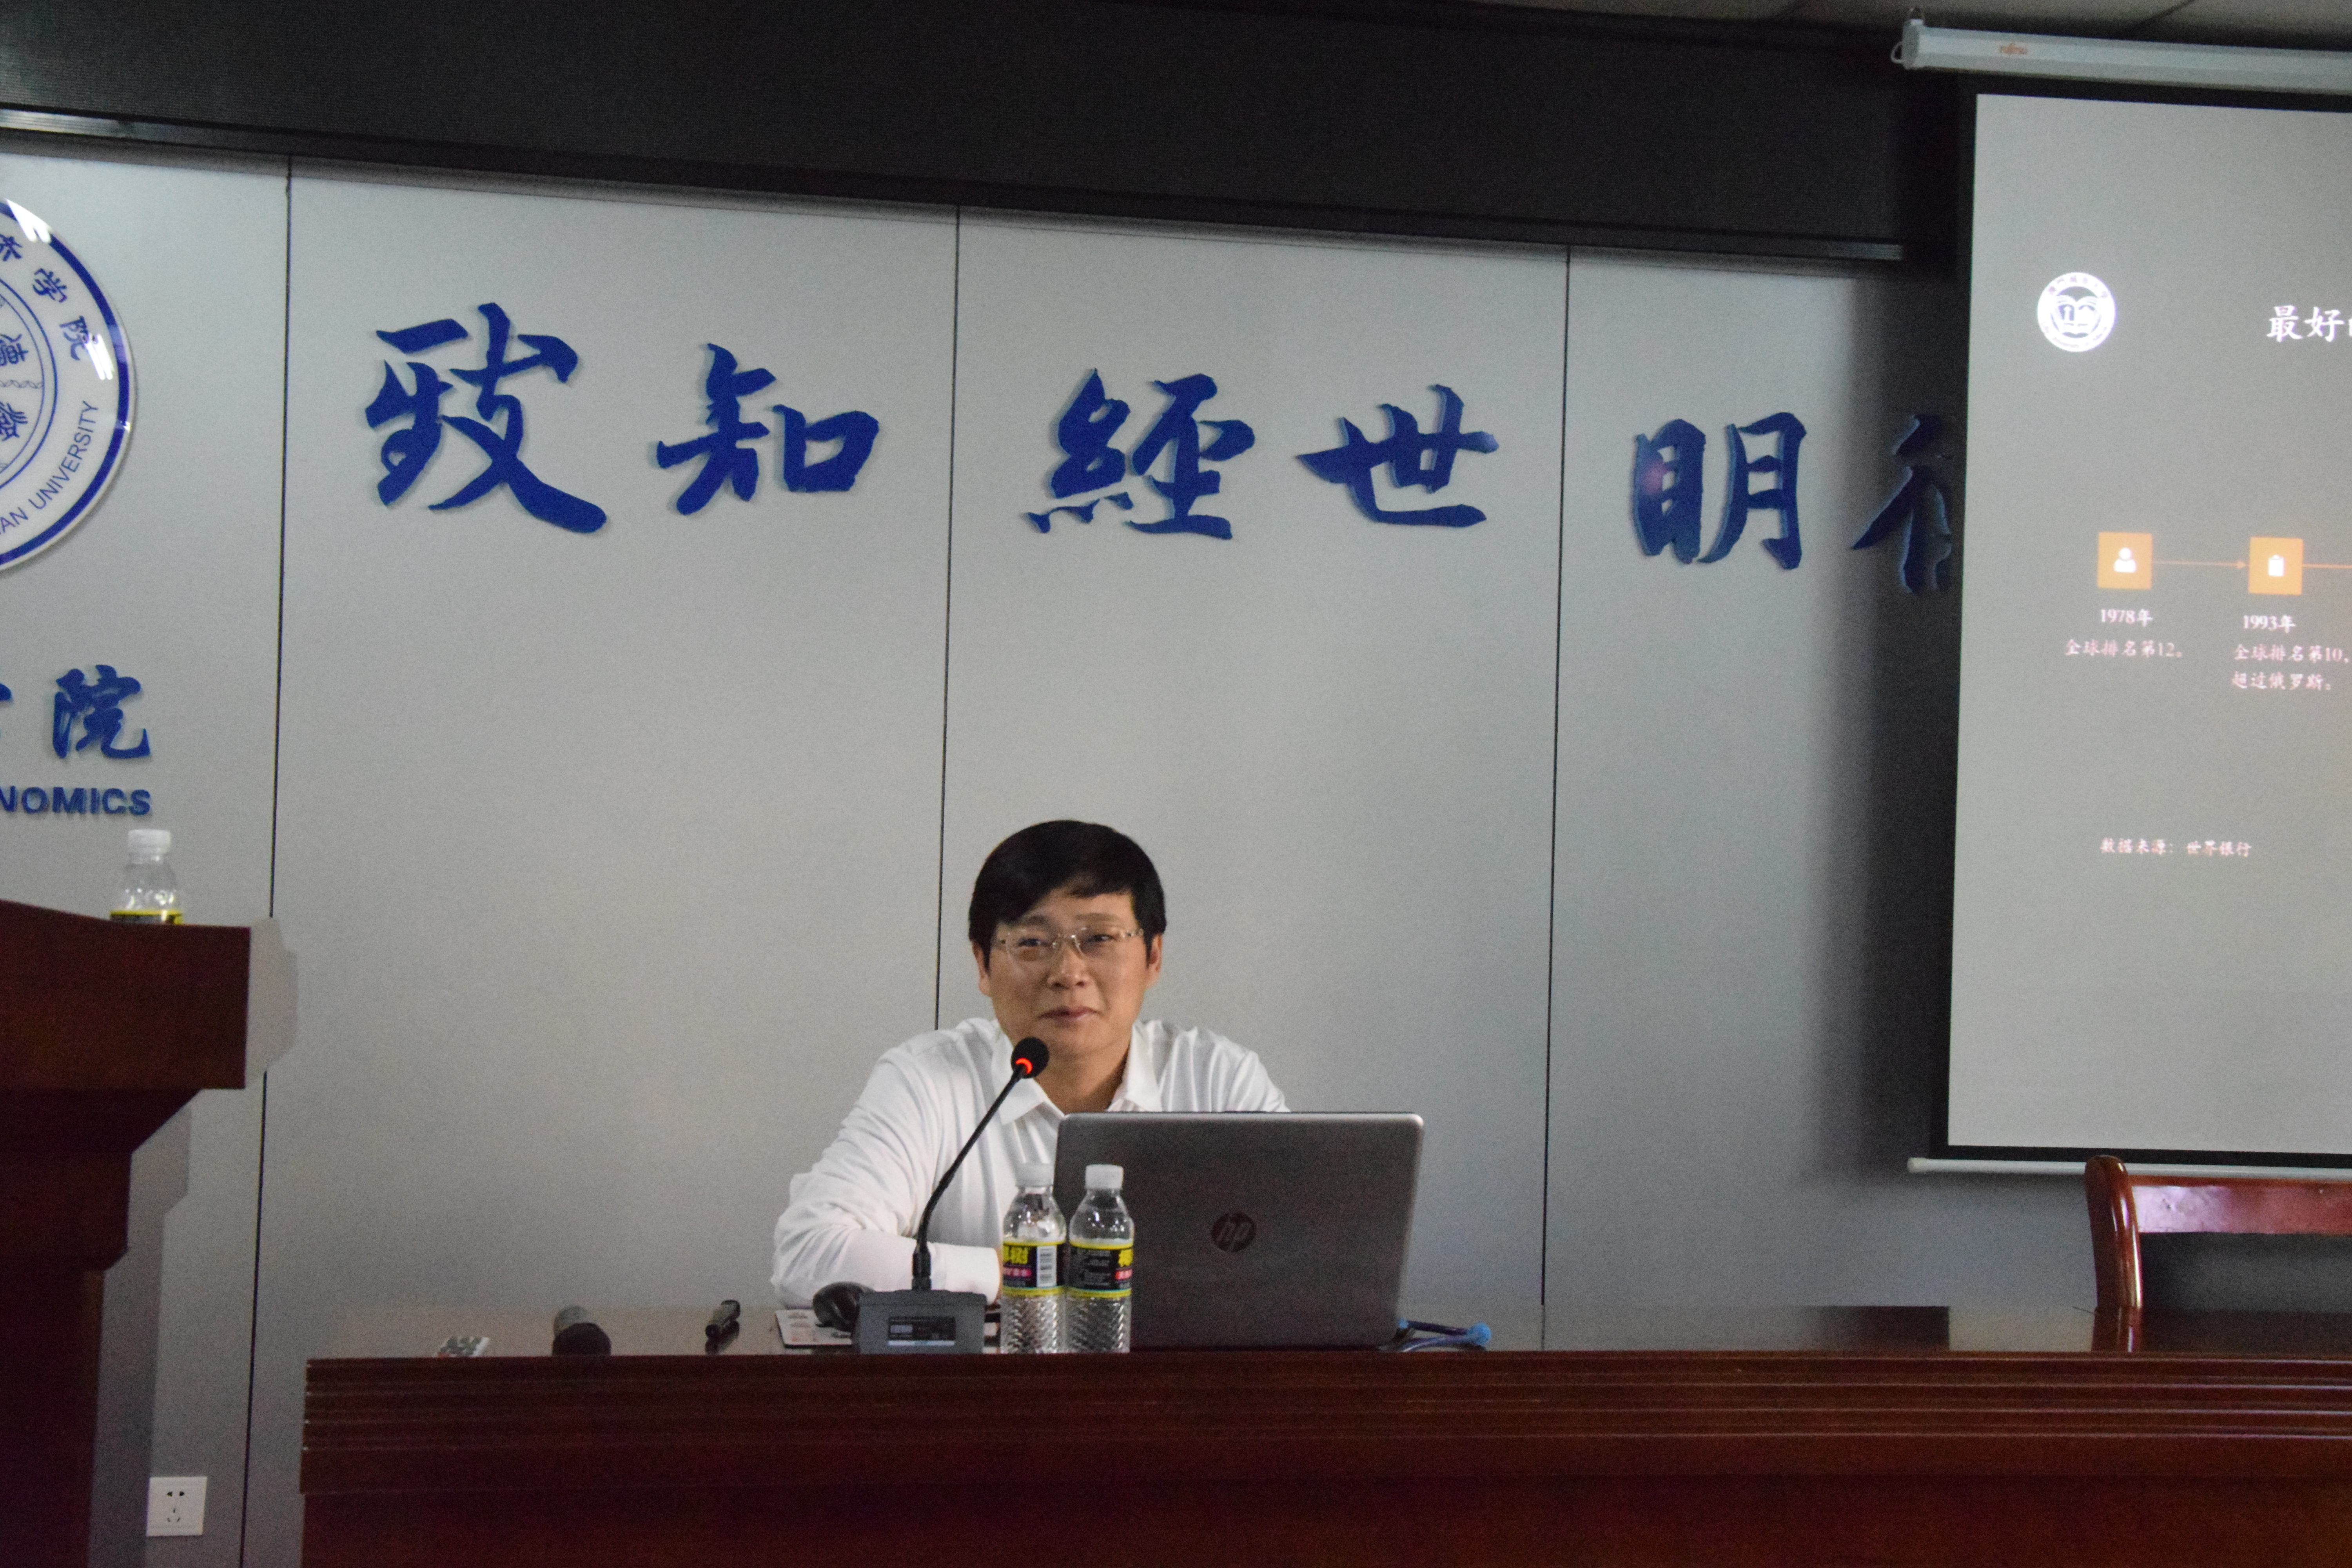 prof. guan on lecture .JPG